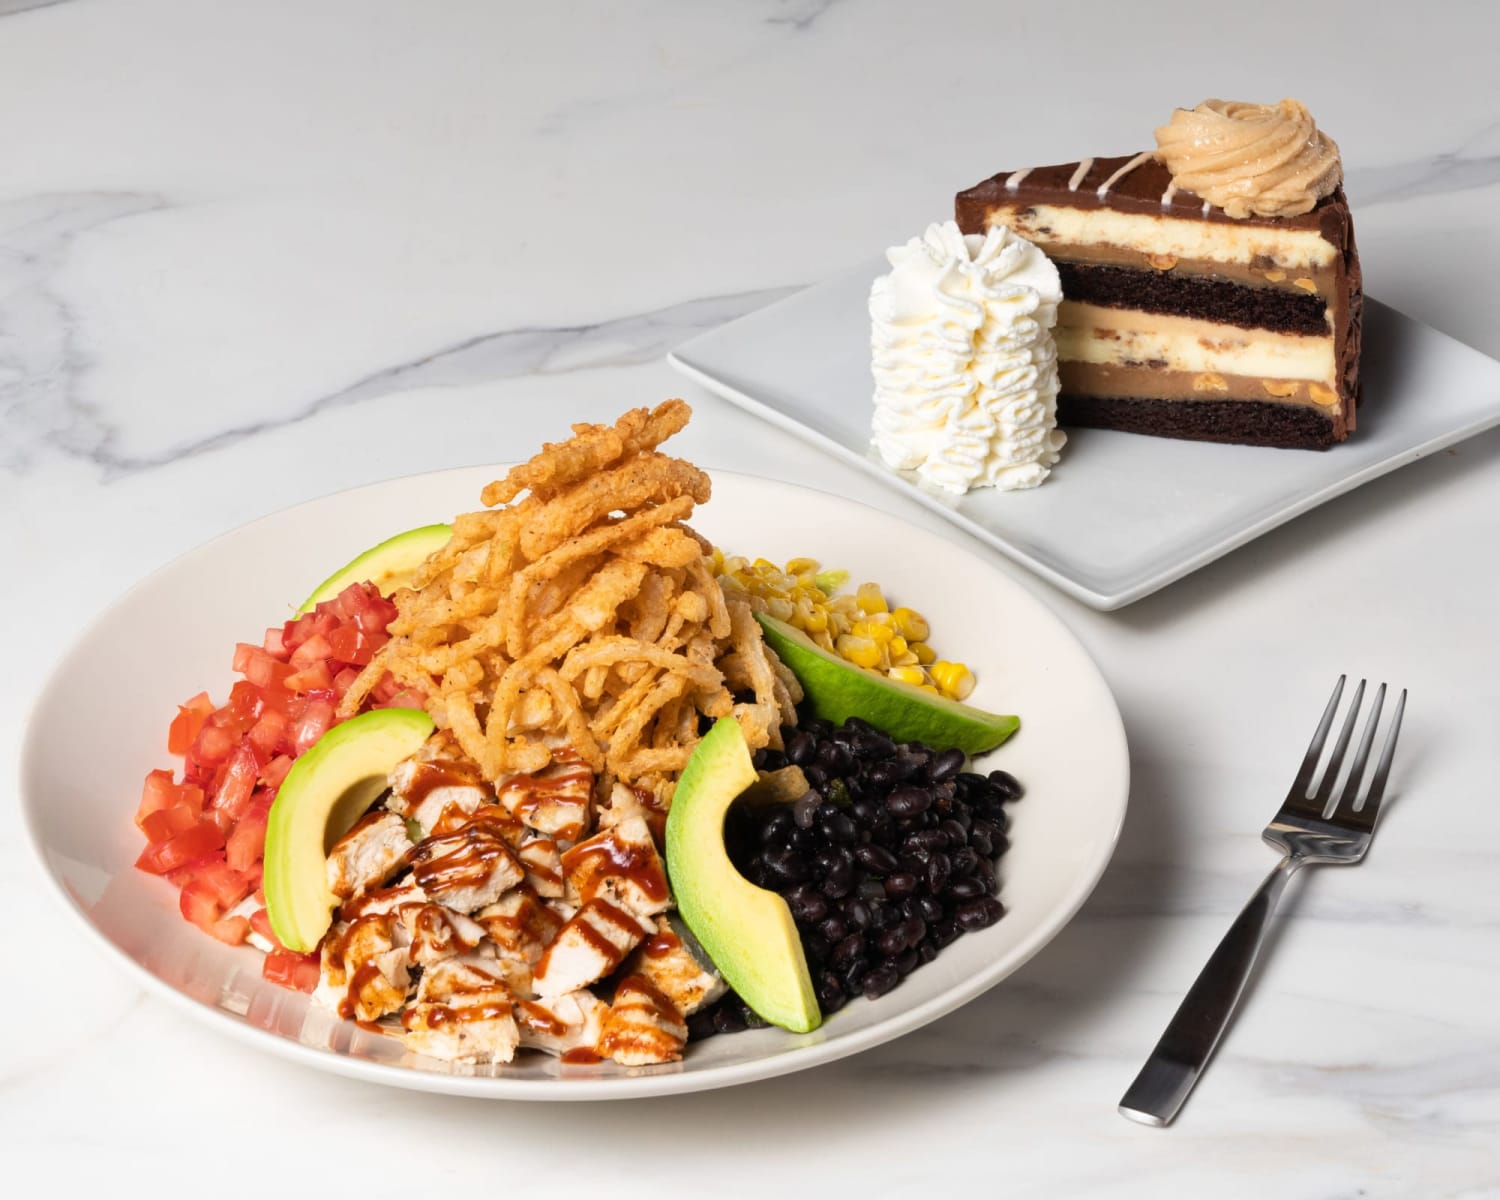 The Cheesecake Factory has 900 lunch combinations with this lunch deal